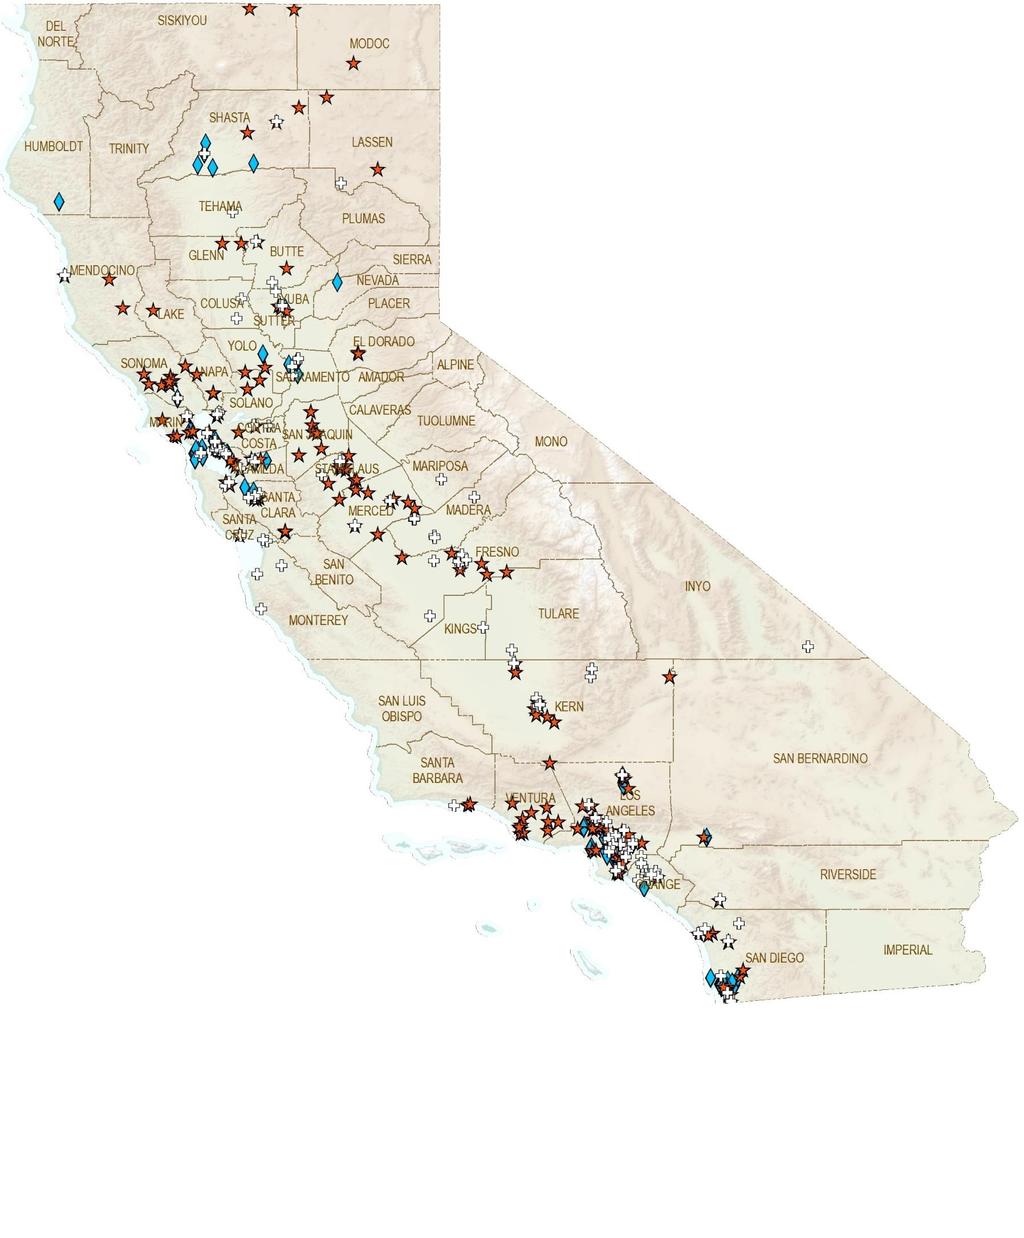 CPCA Behavioral Health Survey 2014 Responses reflect 89 organizations representing more than 500 sites across California Mental Health Services available Mental Health & Substance Use Disorder